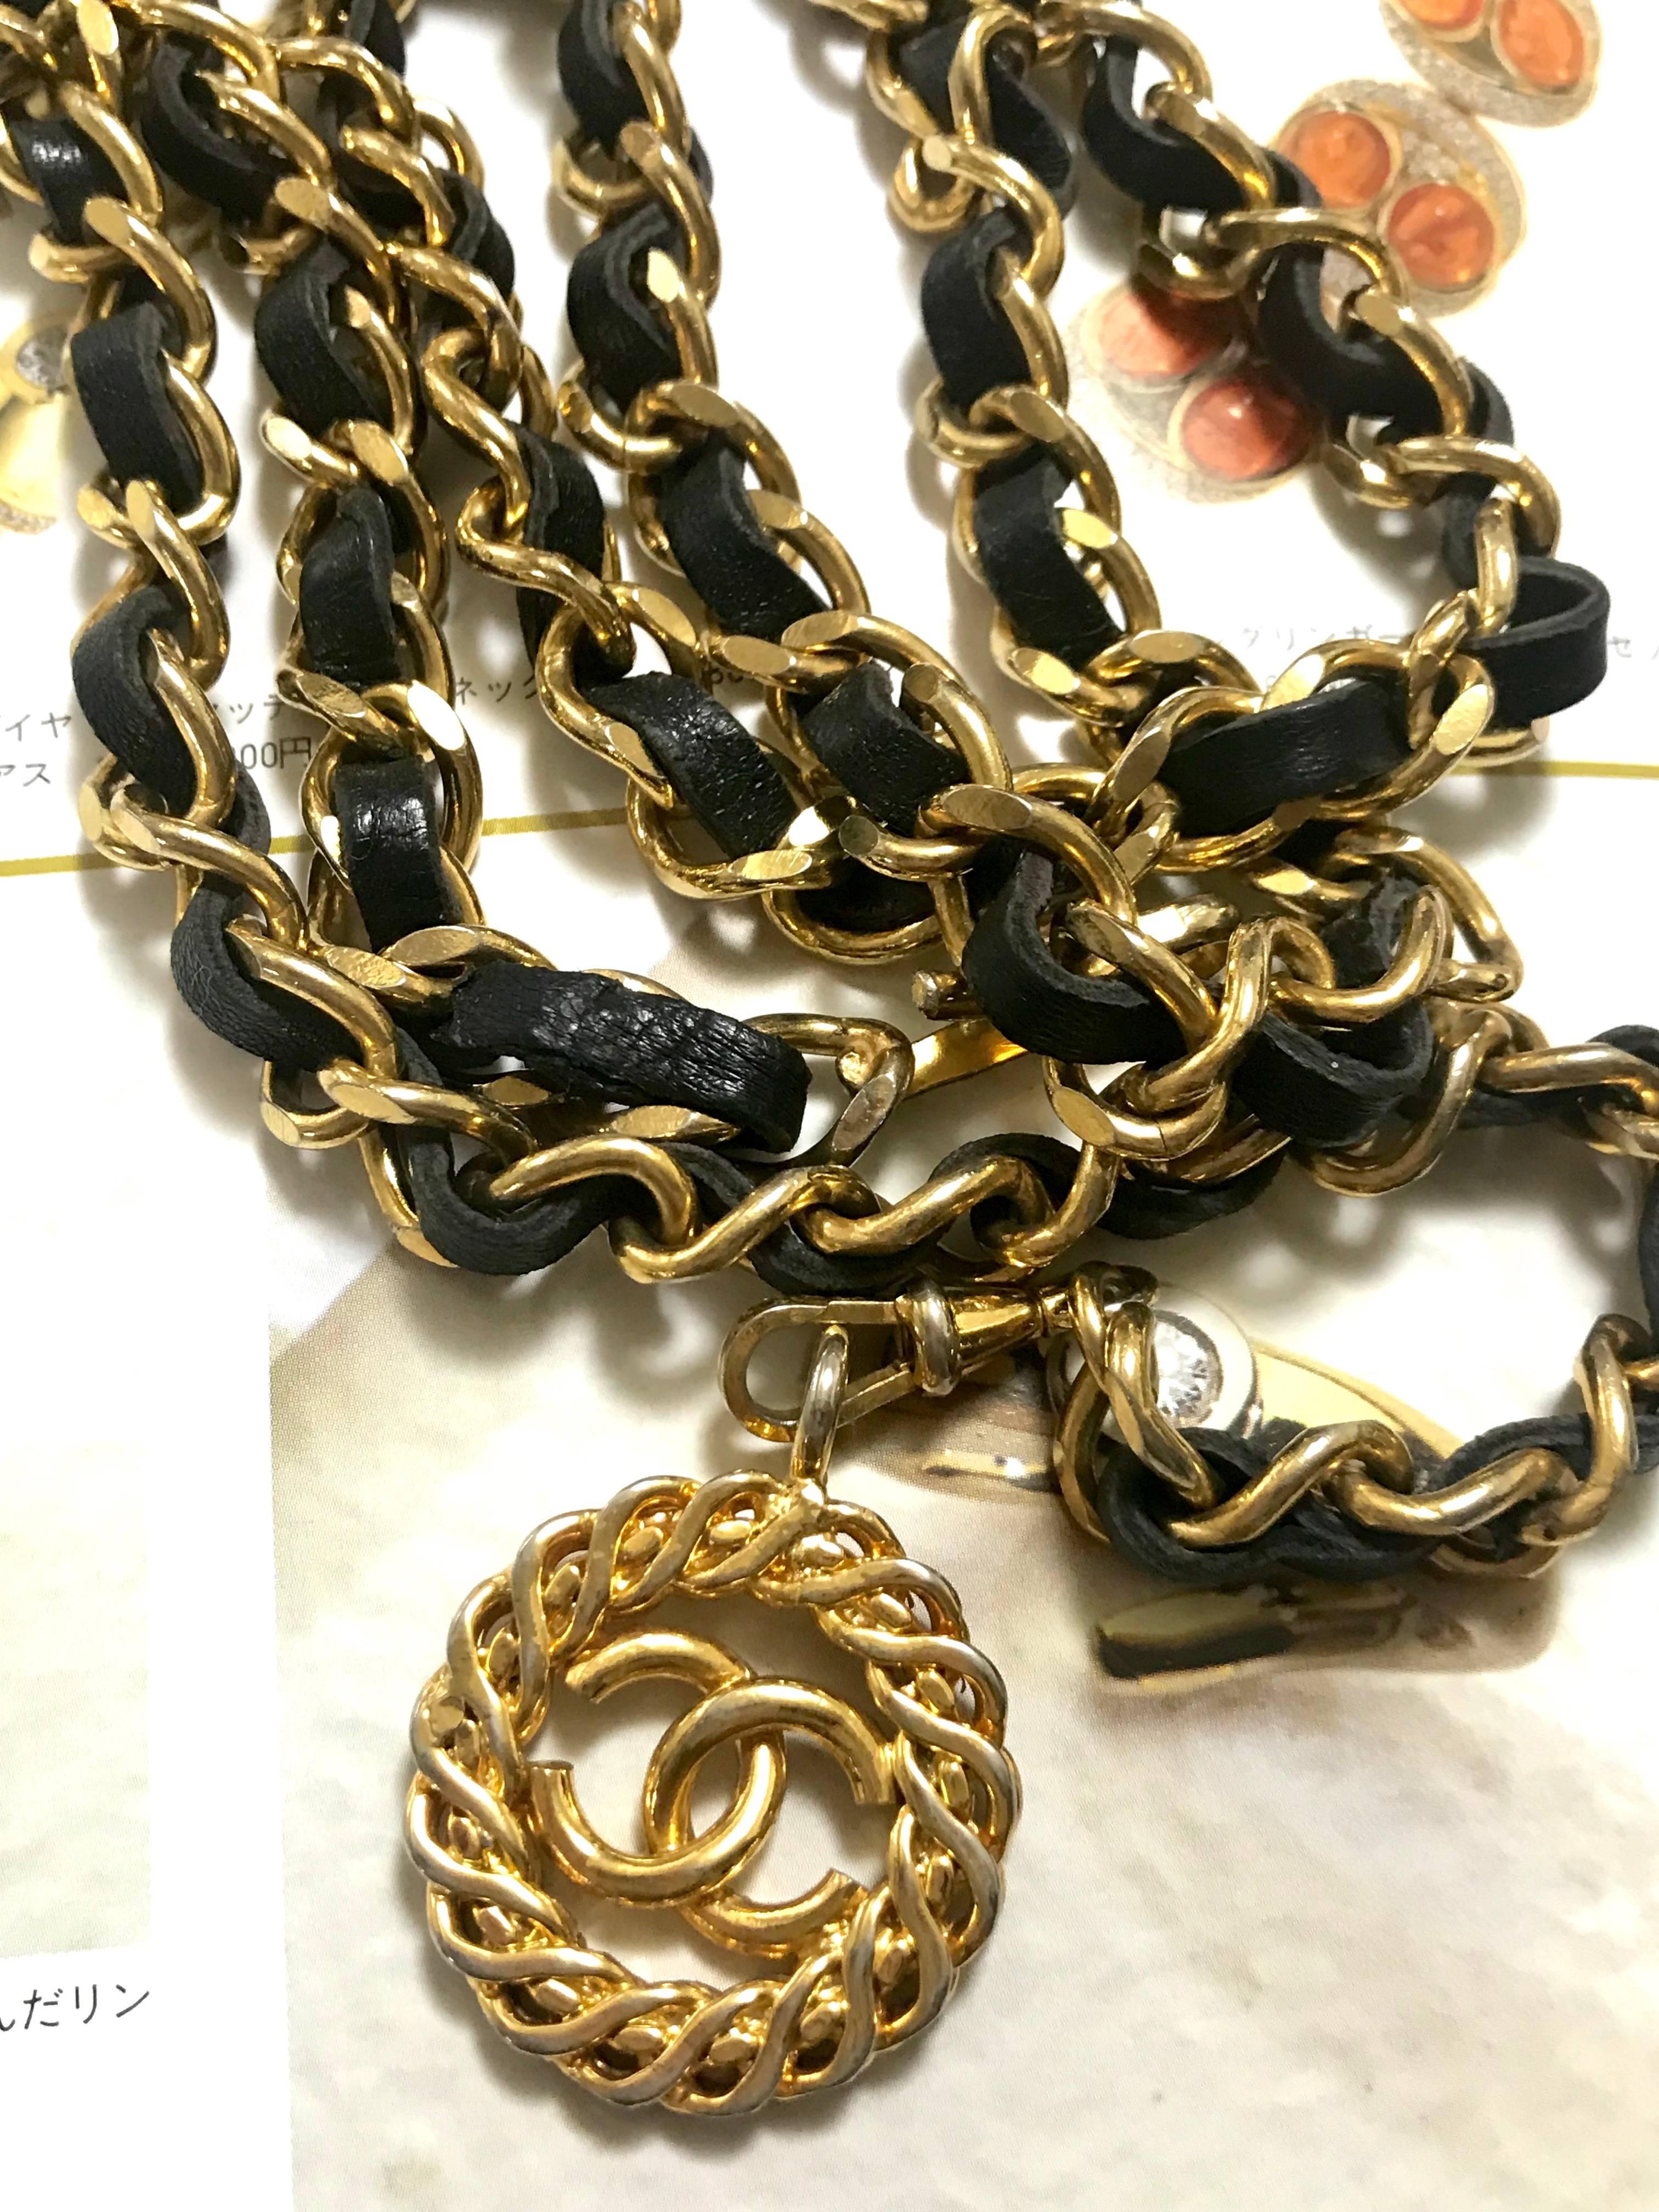 Vintage CHANEL golden chain and black belt/necklace with flower CC mark charm.  1